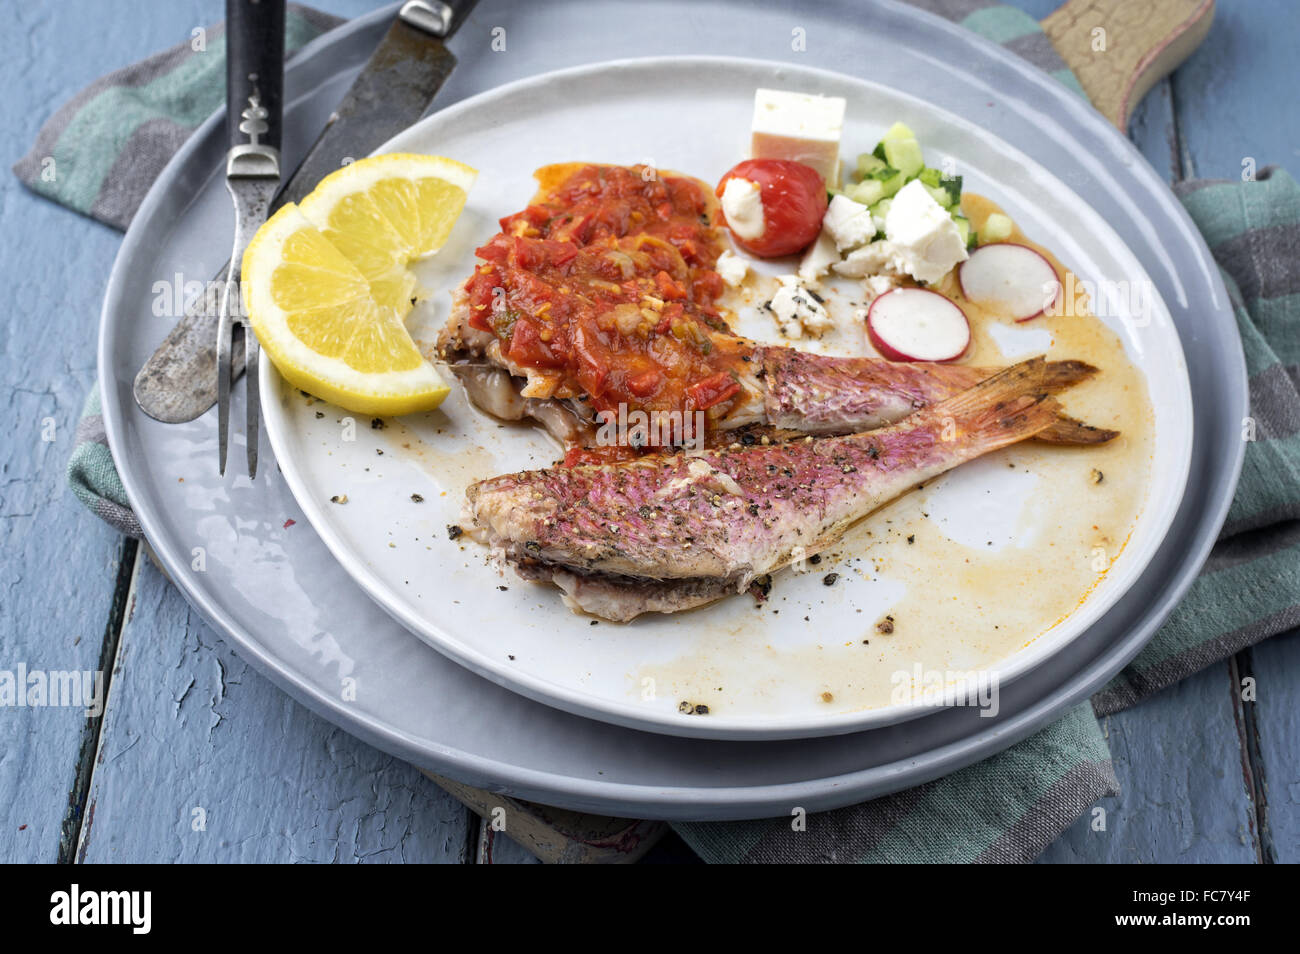 Barbecue Herring on Plate Stock Photo